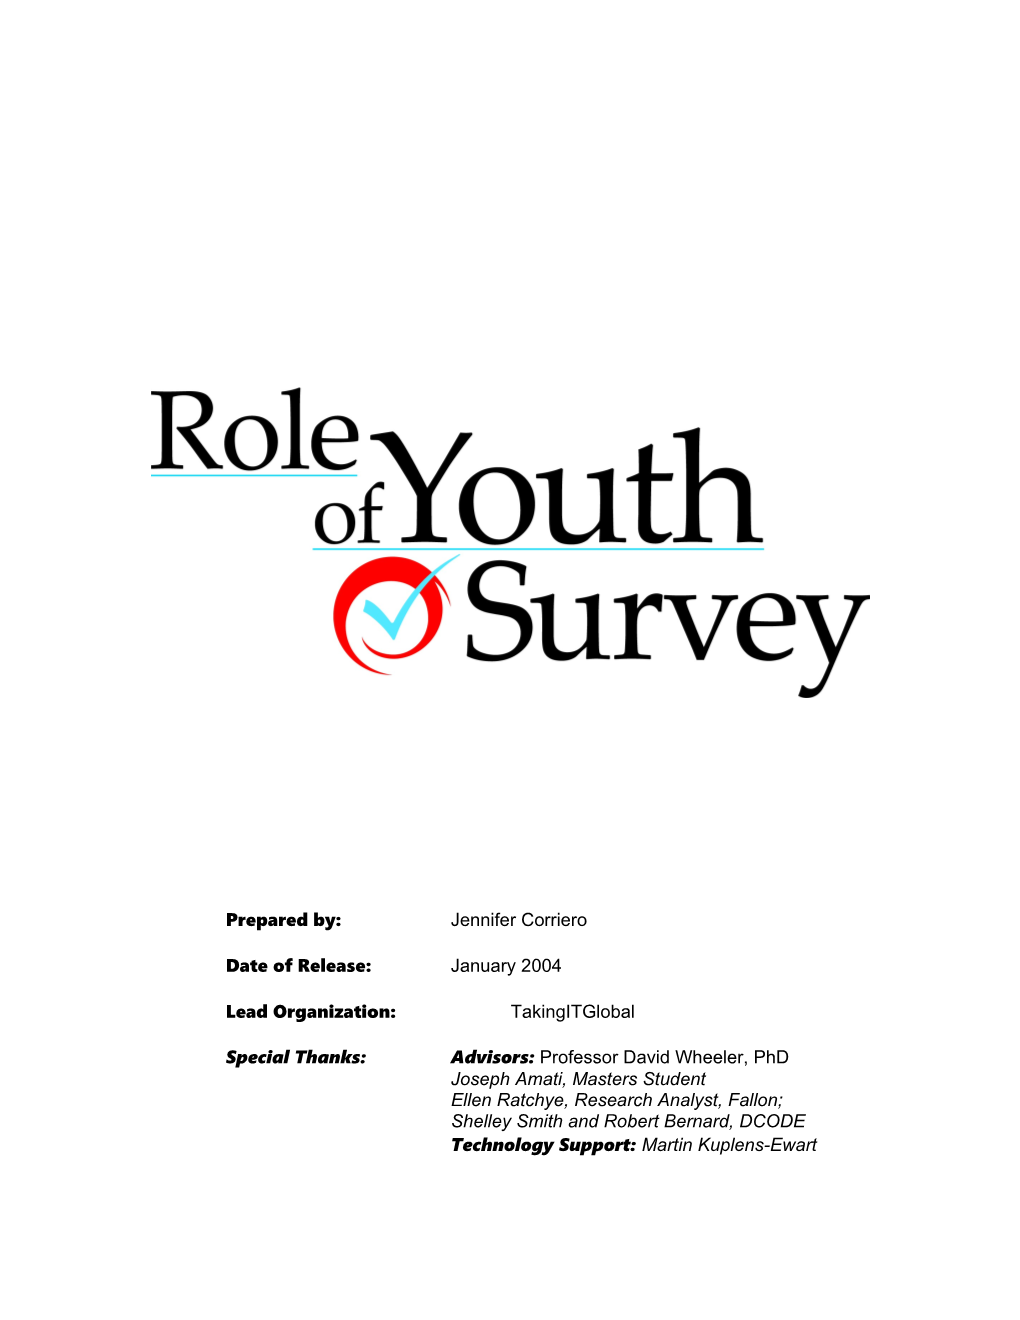 Role of Youth Survey